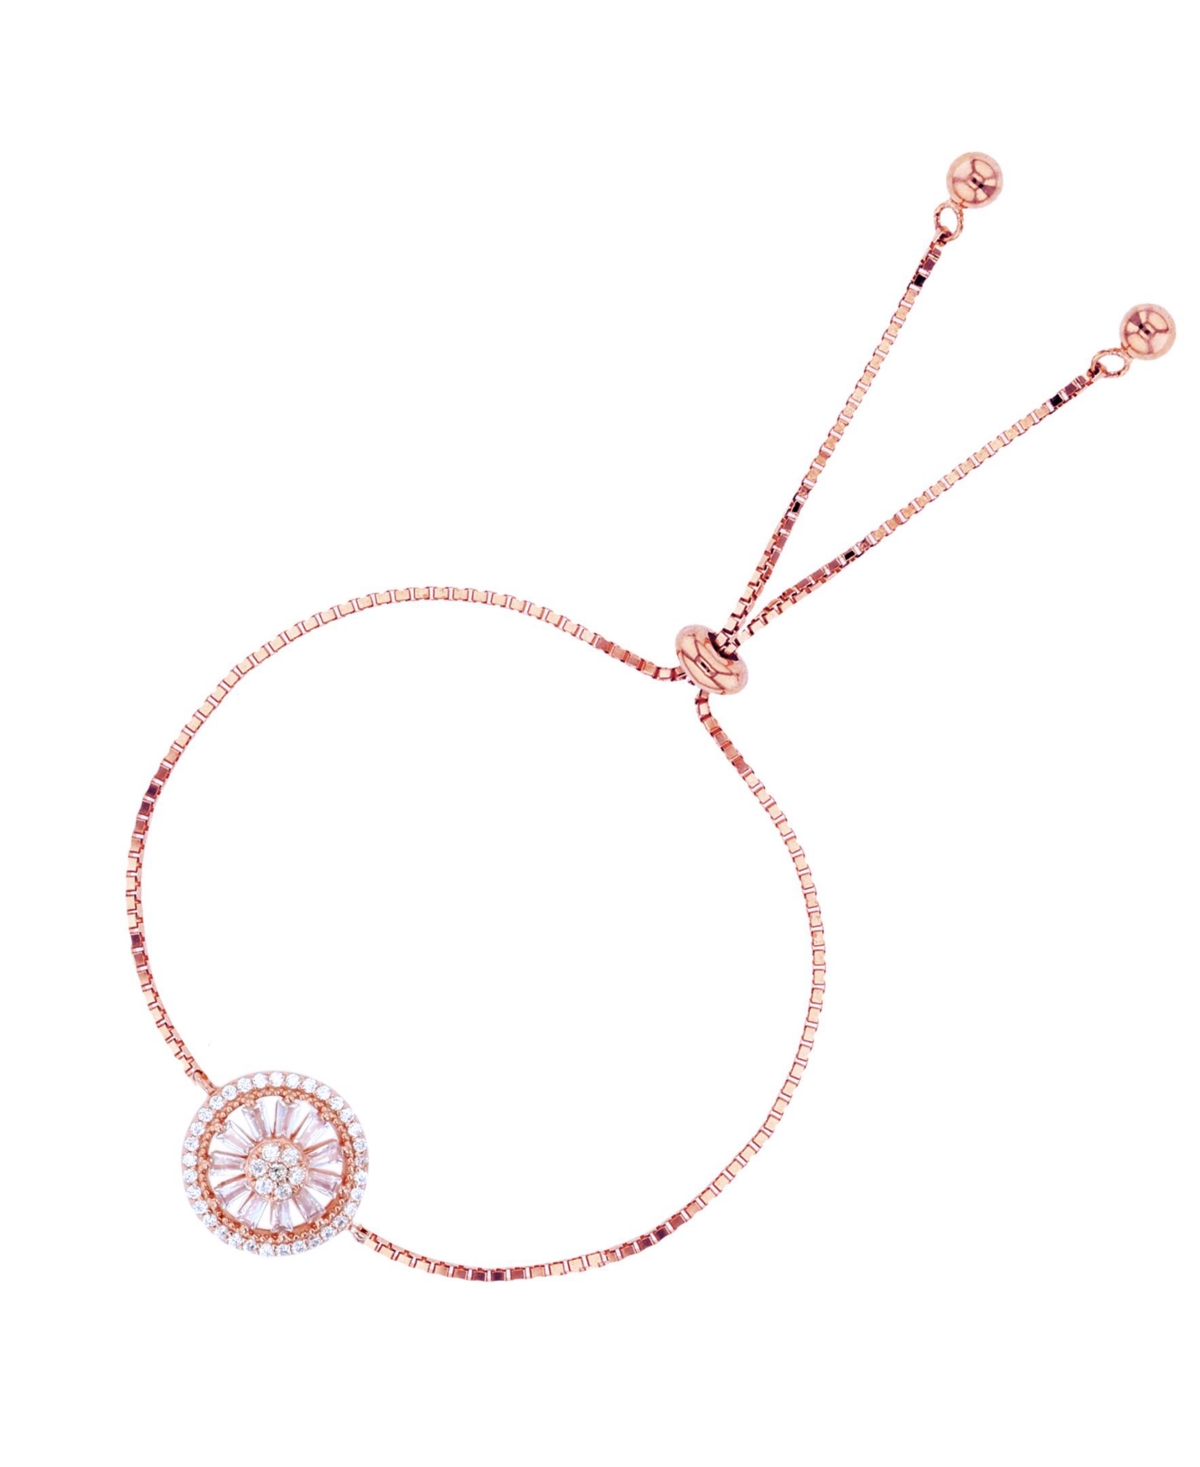 Cubic Zirconia Round and Baguette Wheel Adjustable Bolo Bracelet in Sterling Silver (Also in 14k Gold Over Silver or 14k Rose Gold Over Silver) - Pink